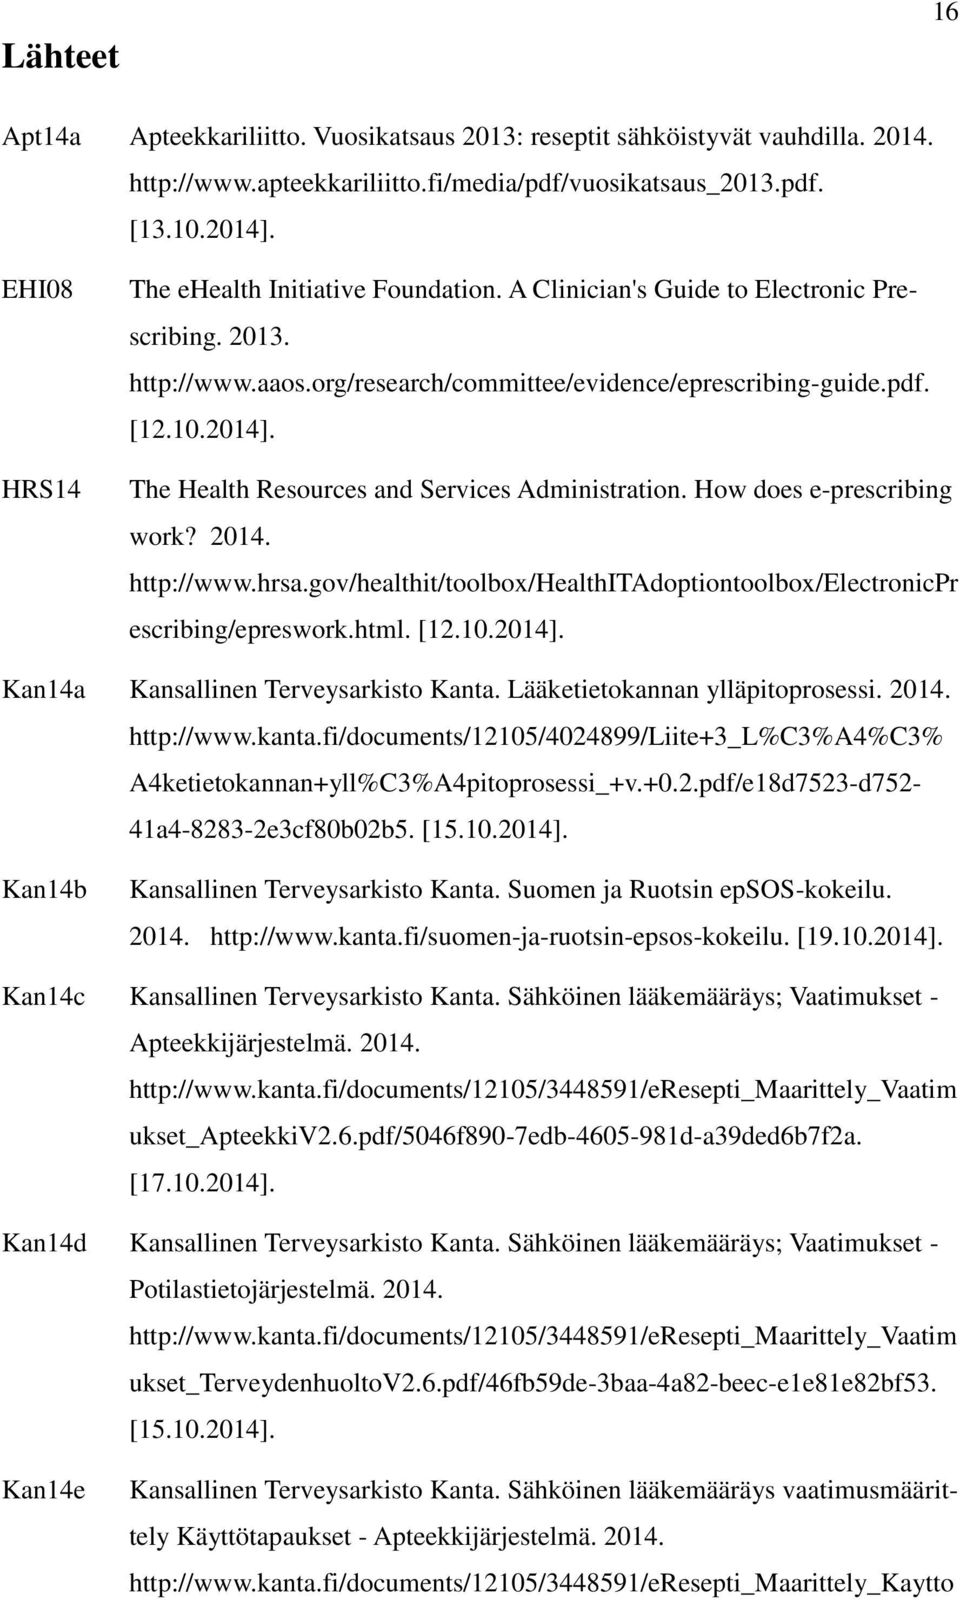 The Health Resources and Services Administration. How does e-prescribing work? 2014. http://www.hrsa.gov/healthit/toolbox/healthitadoptiontoolbox/electronicpr escribing/epreswork.html. [12.10.2014].